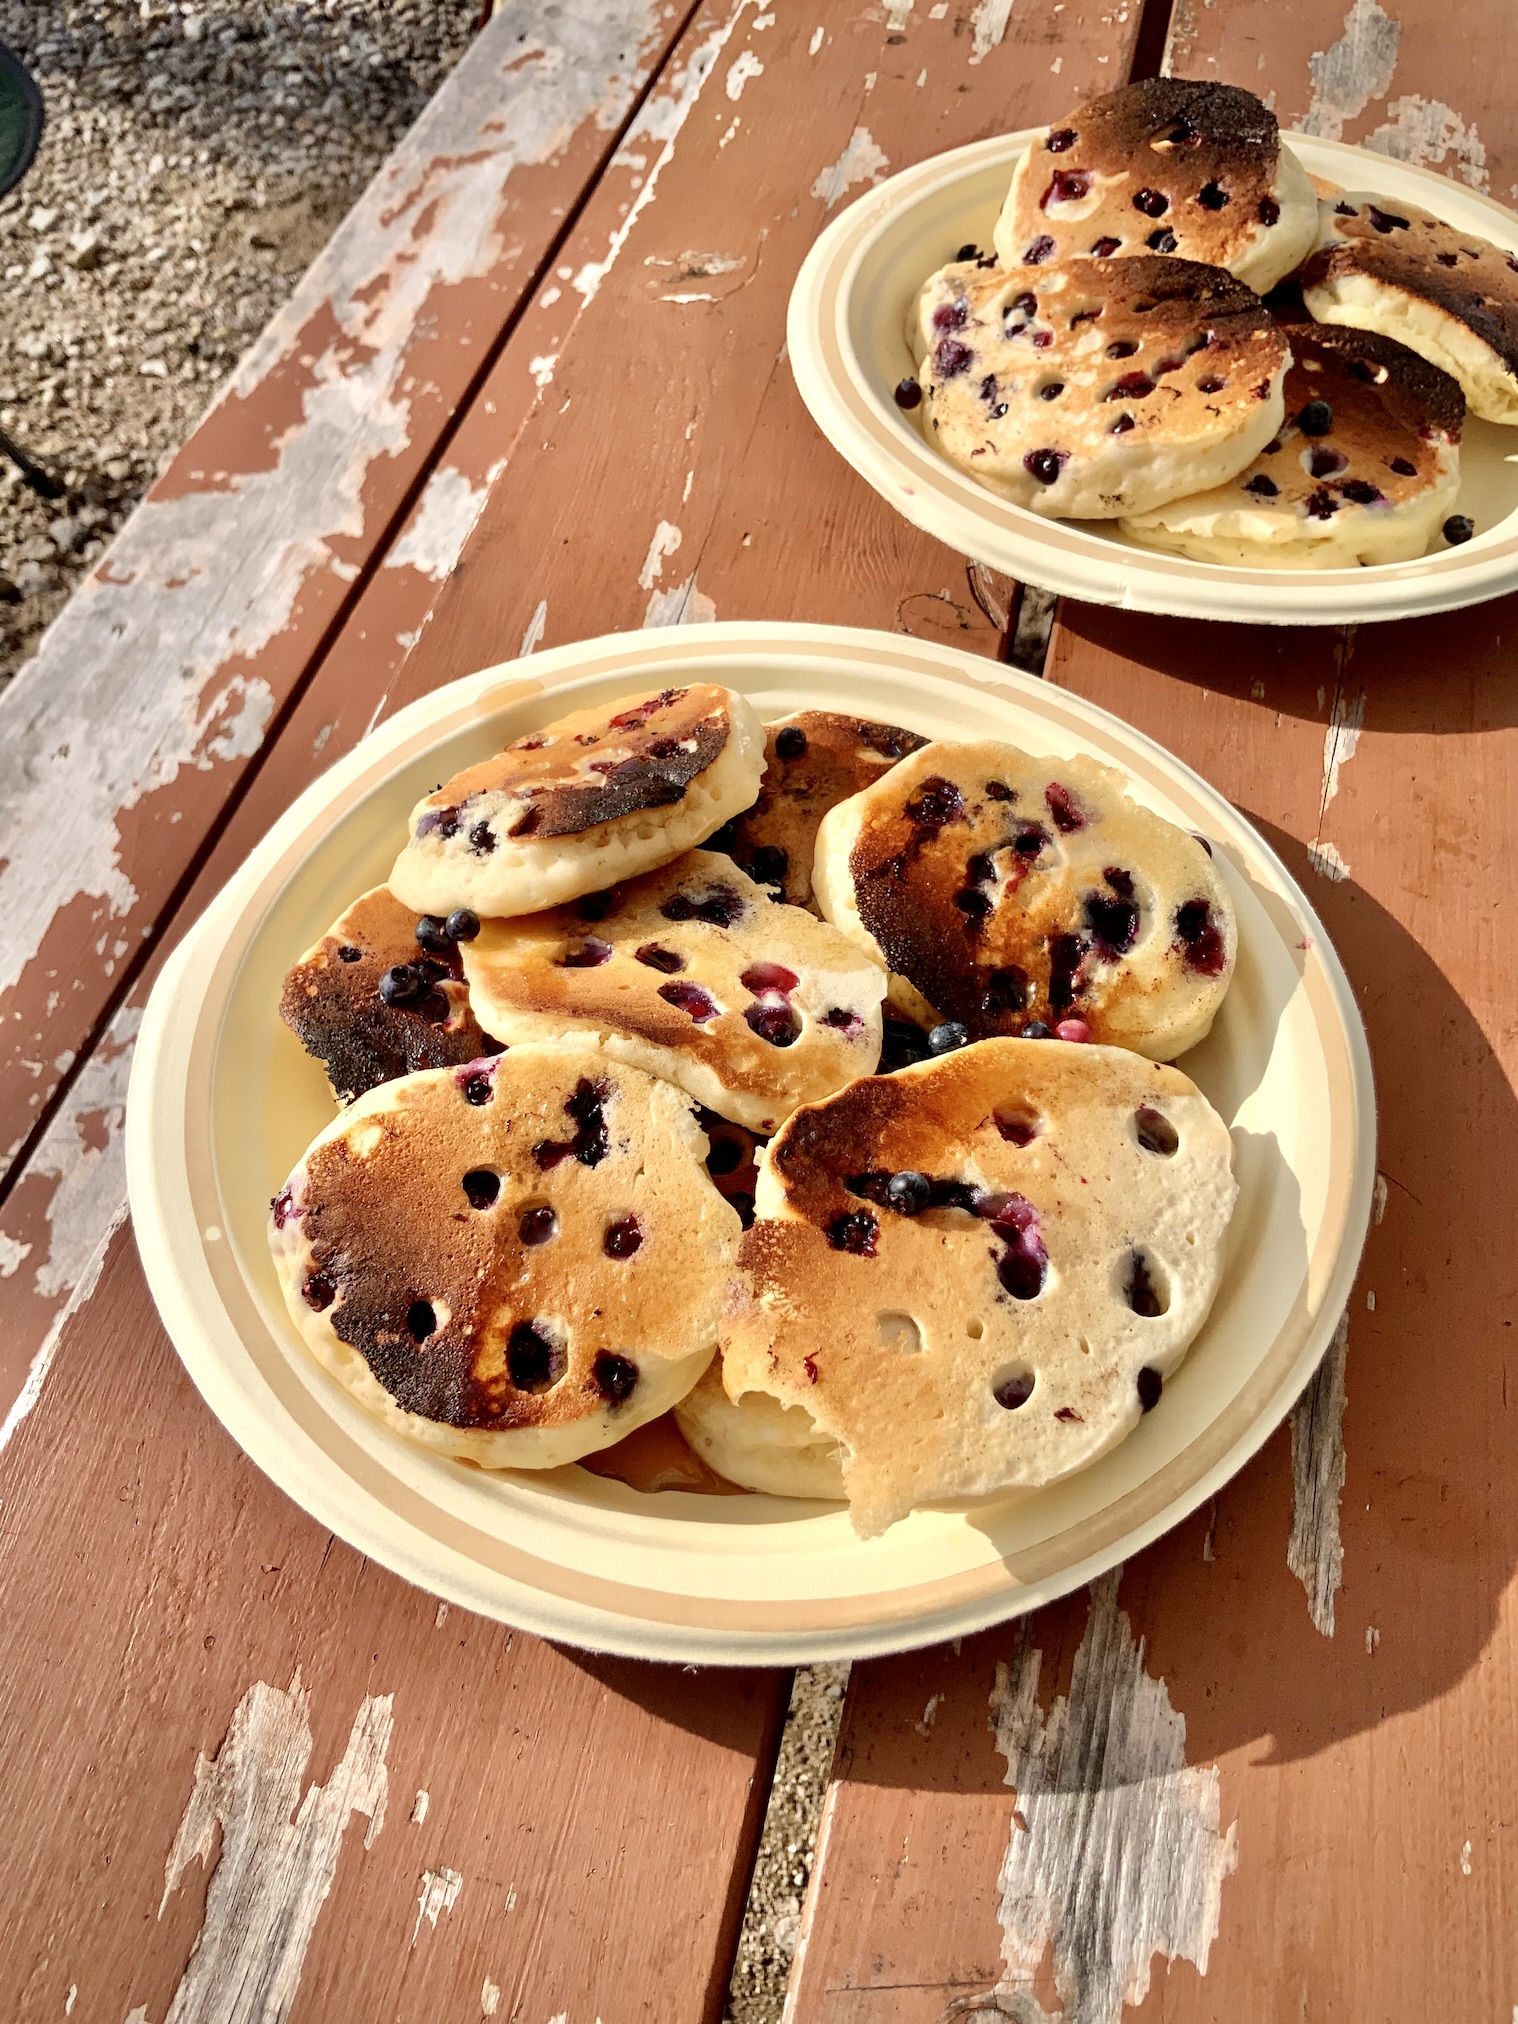 Plate of blueberry pancakes on a picnic table at a campground